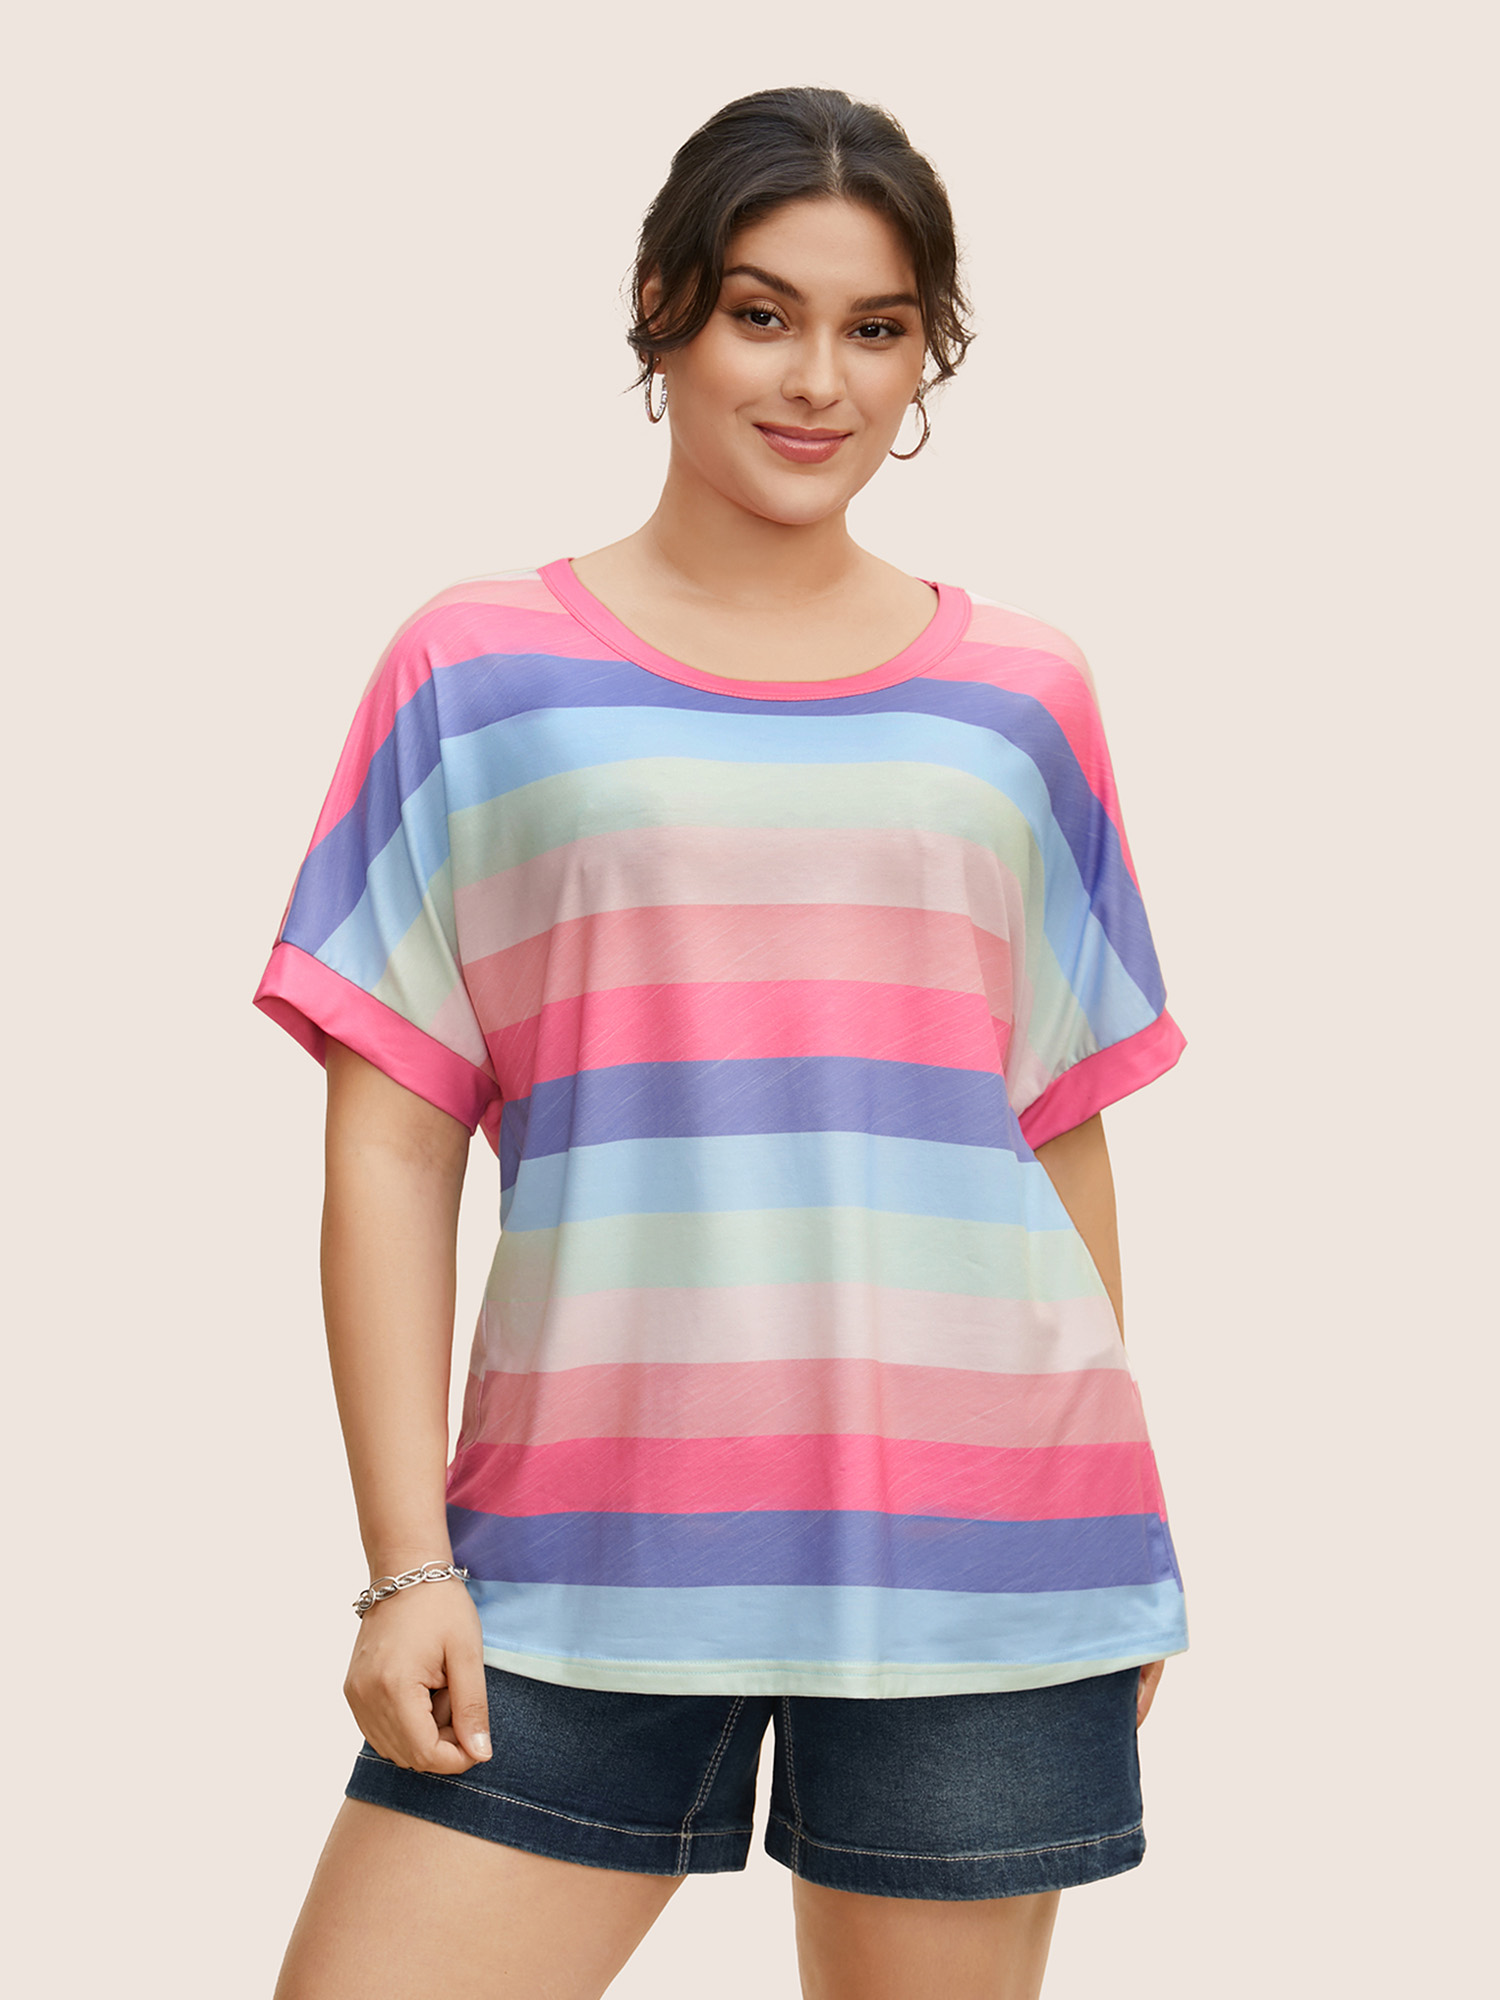 

Plus Size Colored Striped Crew Neck Batwing Sleeve T-shirt Crepe Women Casual Contrast Round Neck Everyday T-shirts BloomChic